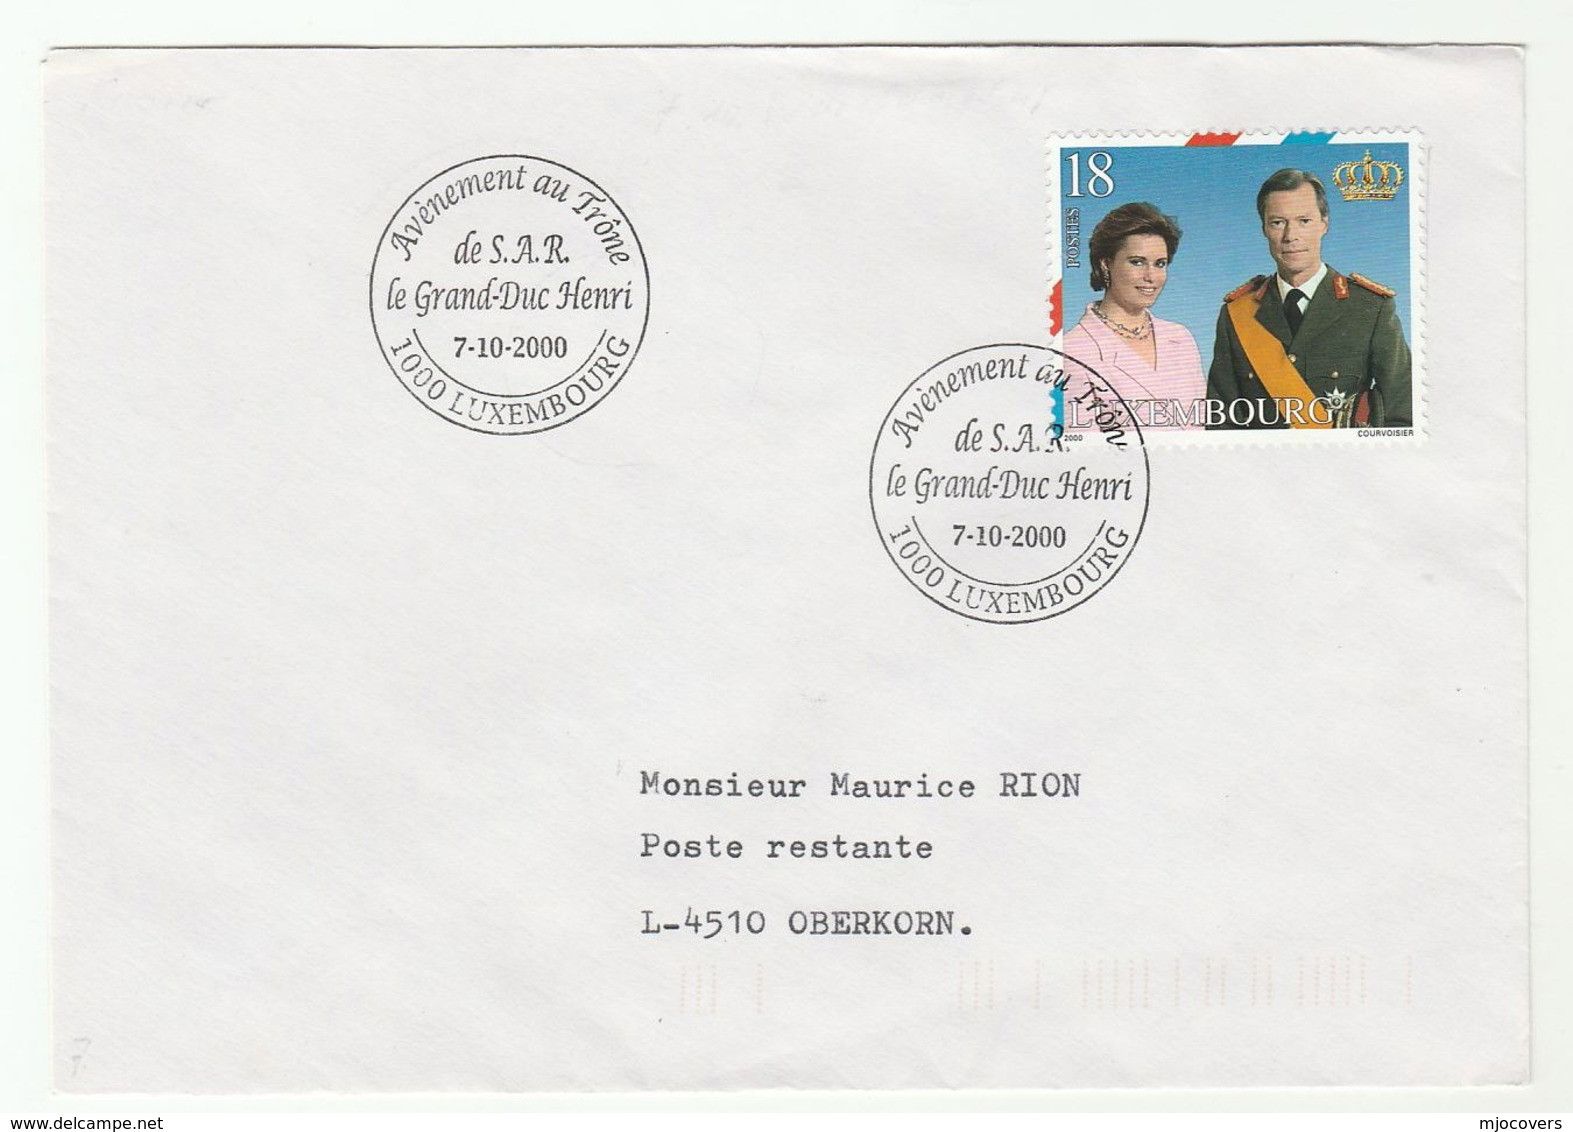 2000 LUXEMBOURG ACCESSION EVENT COVER Royalty Stamps - Covers & Documents